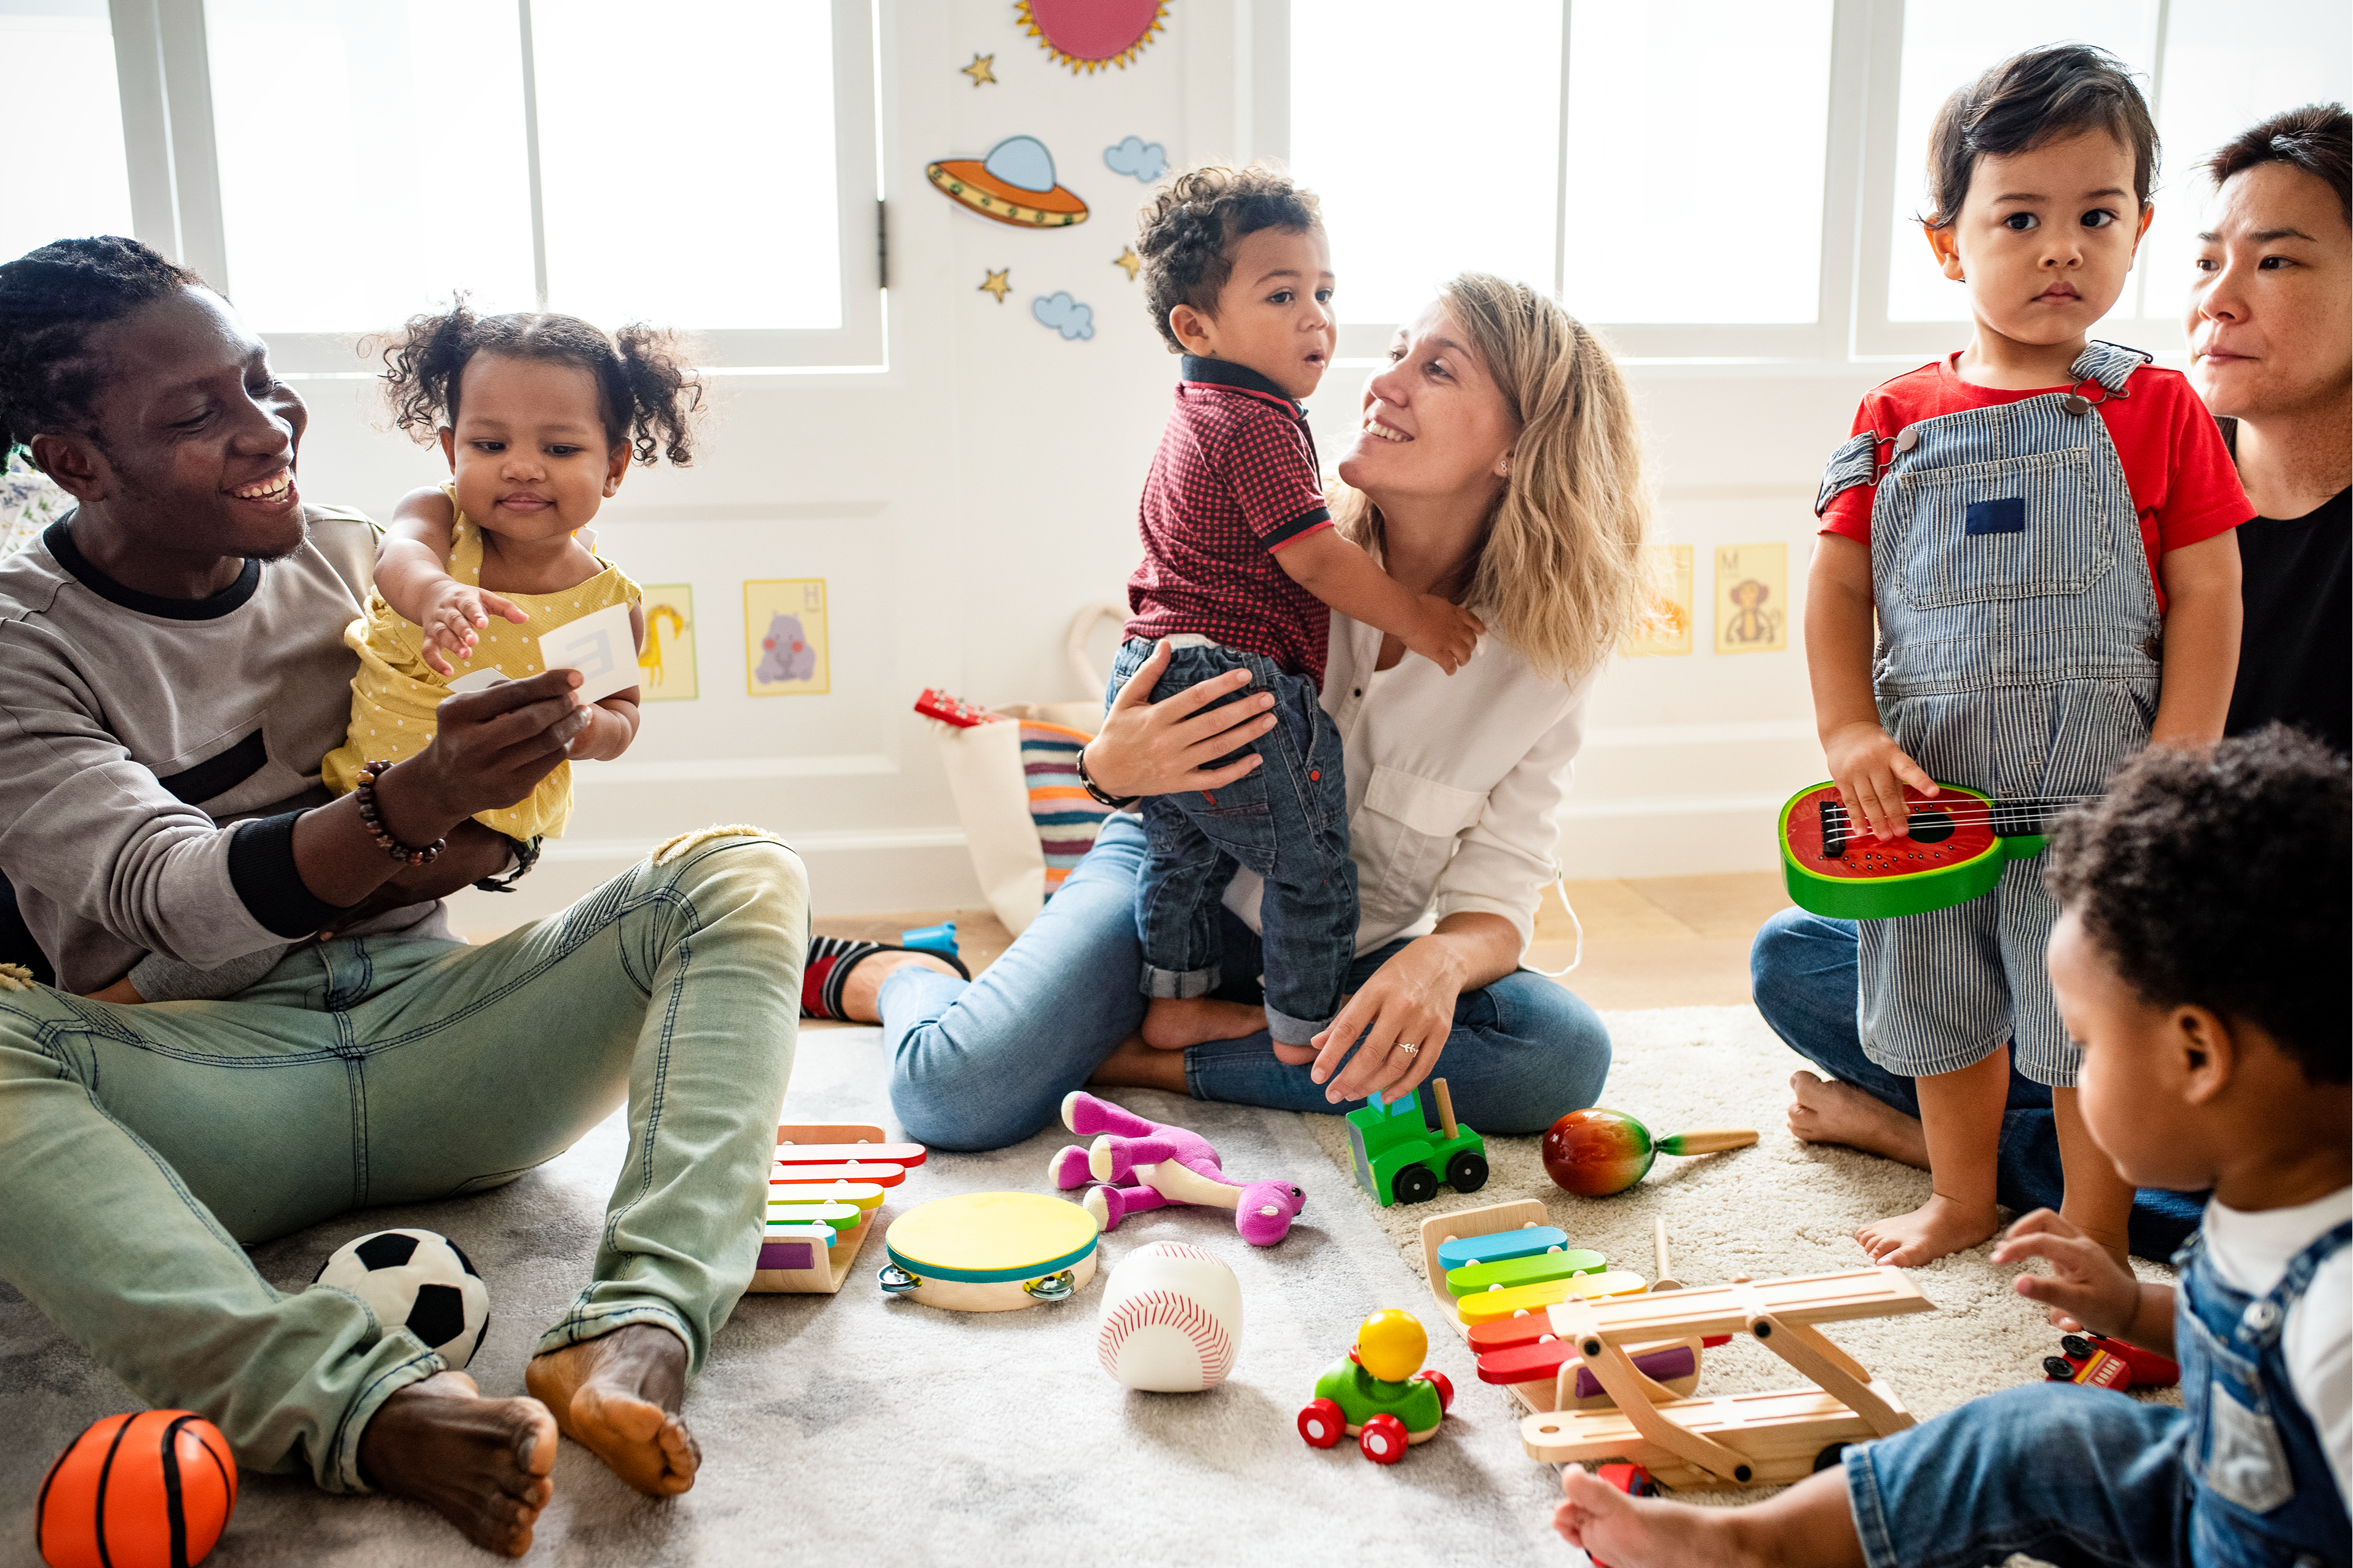 Diverse families at playgroup